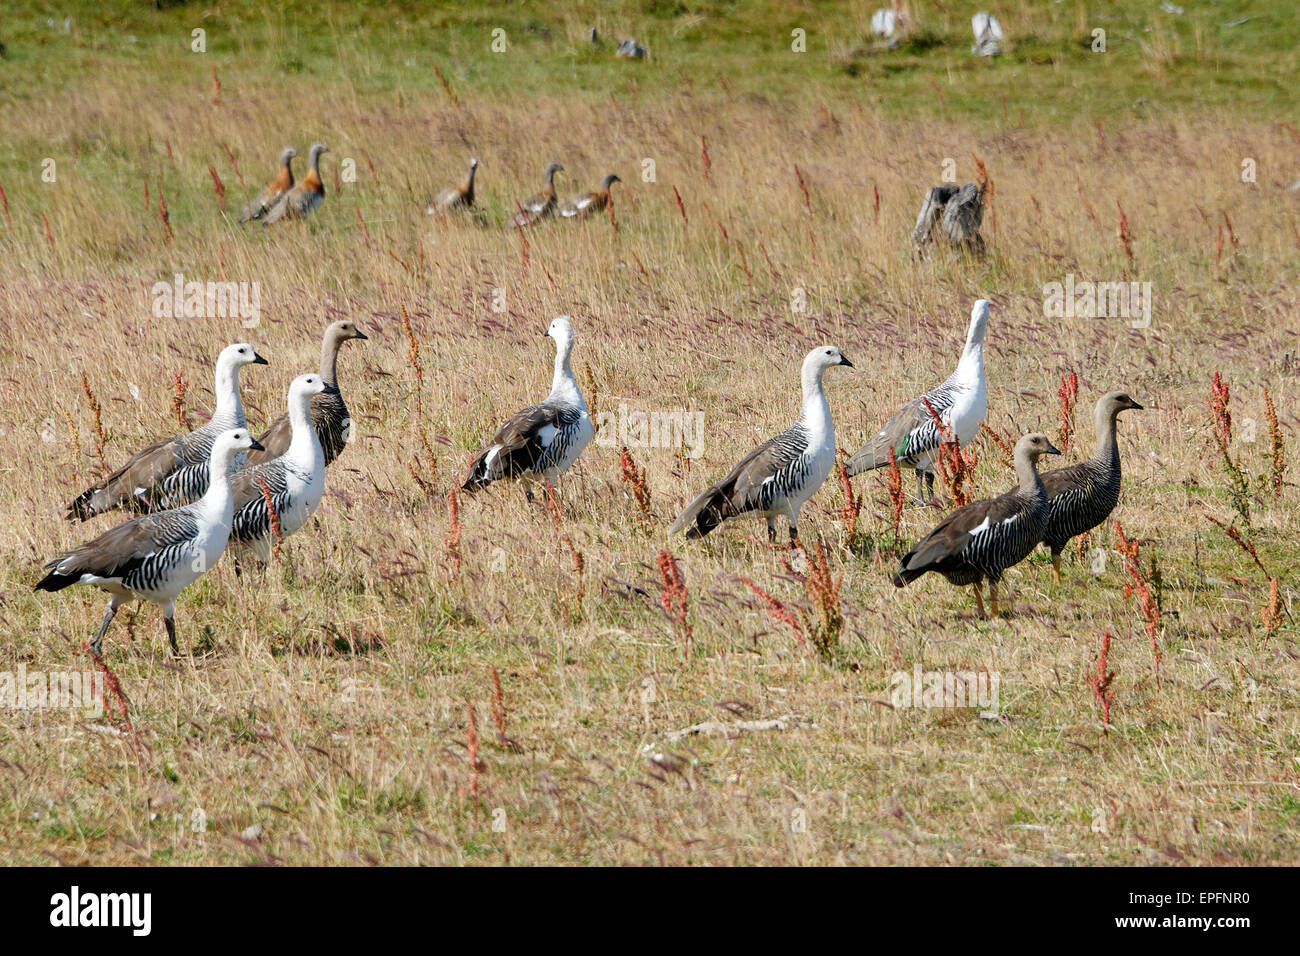 Flock of Upland Geese Patagonia Argentina Stock Photo